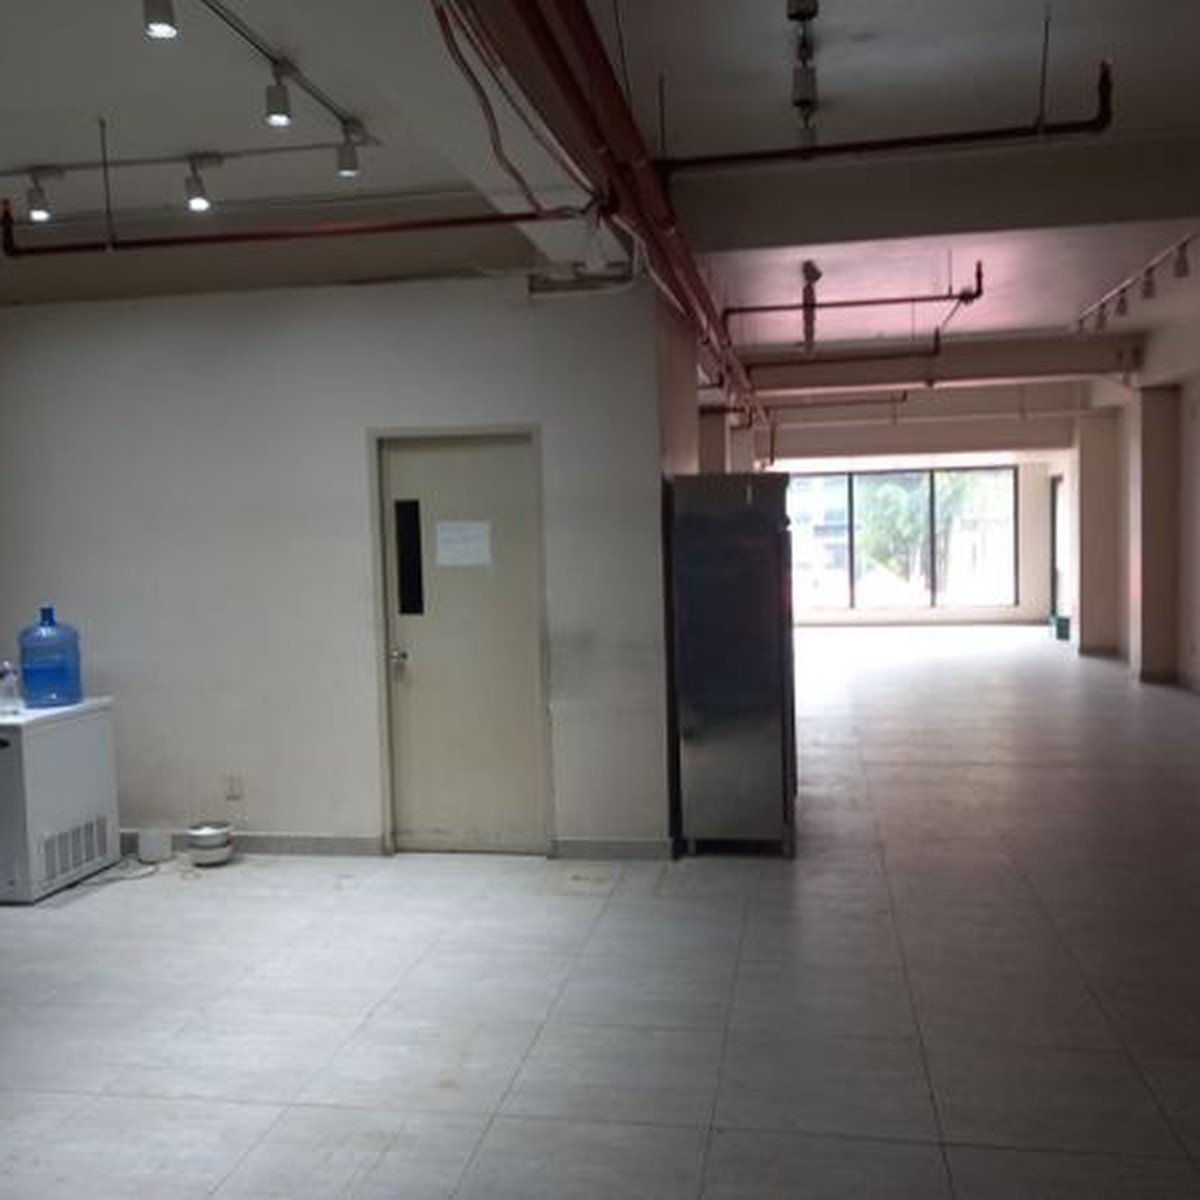 Ground Floor Space Rent Lease Mandaluyong City Manila 220 sqm